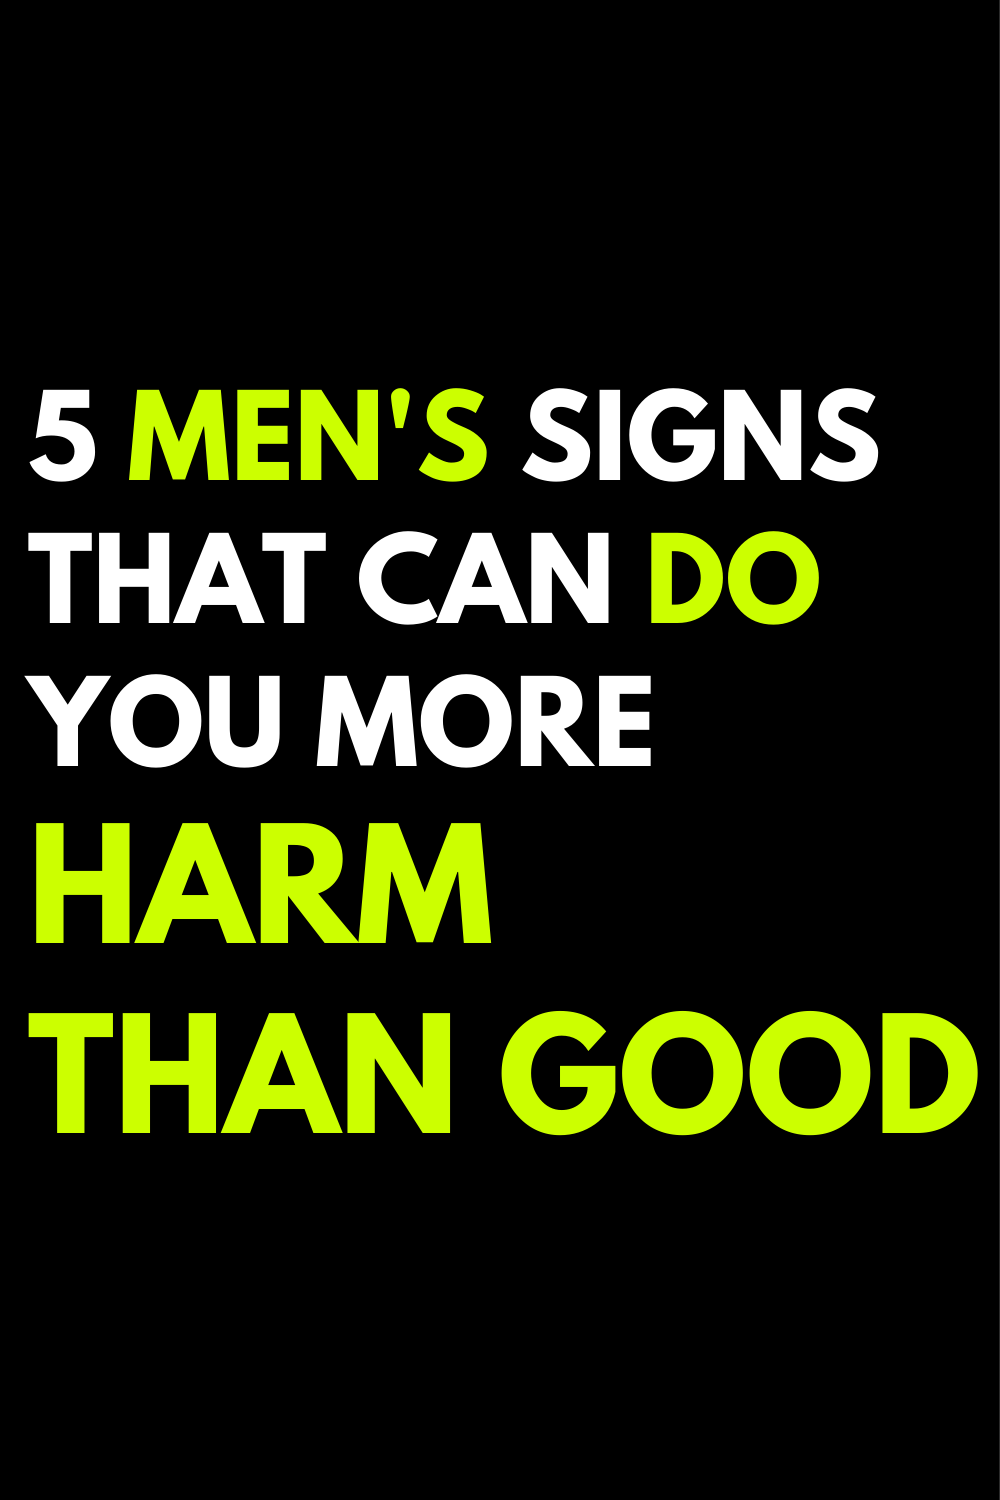 5 men's signs that can do you more harm than good